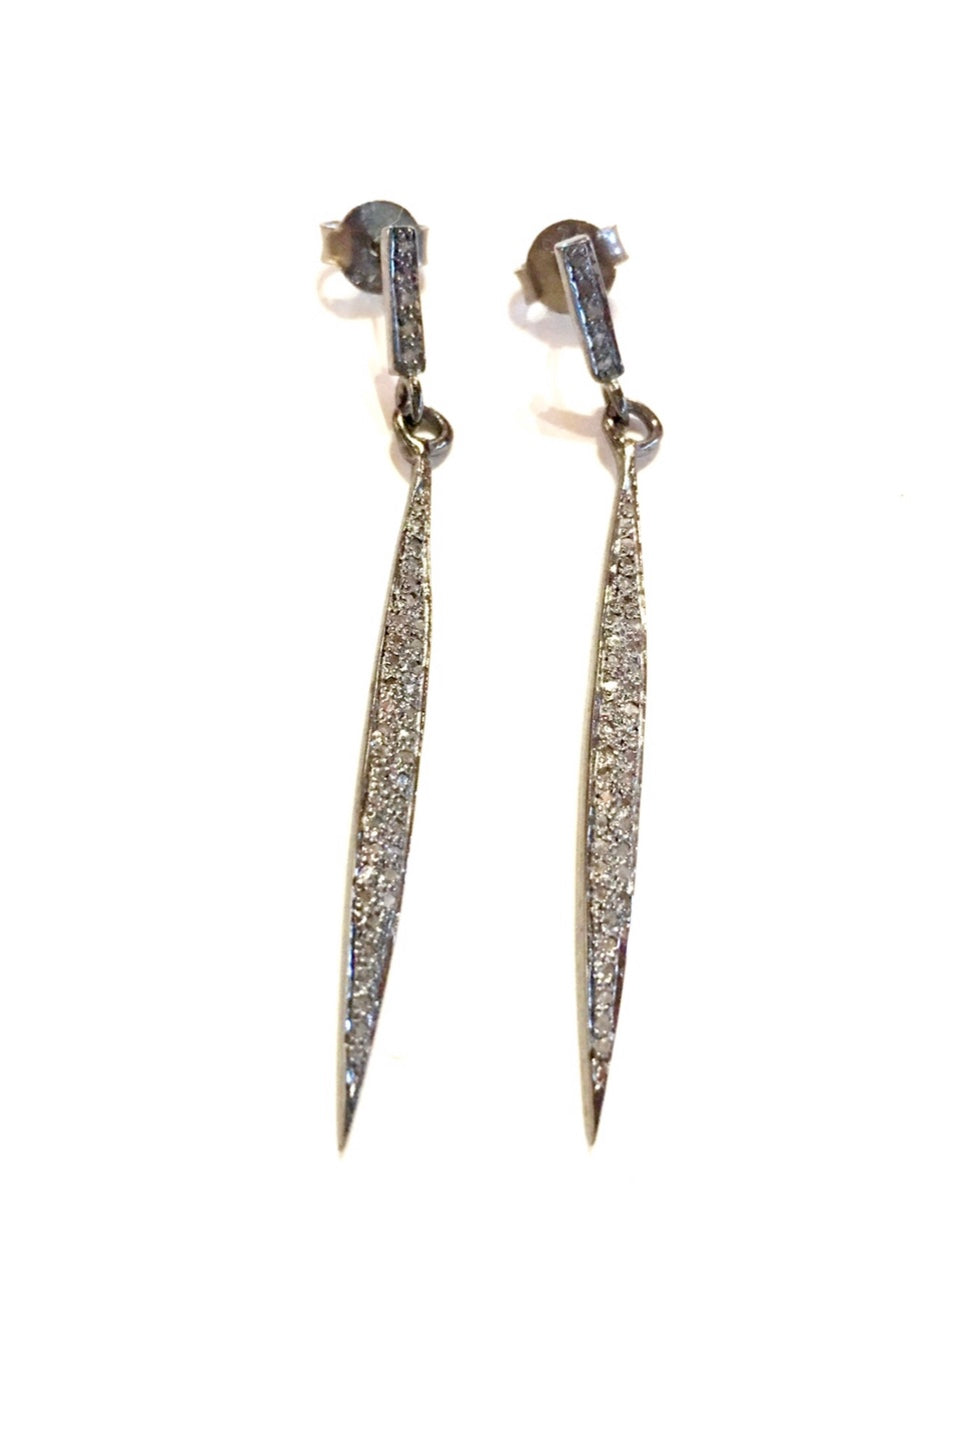 Spark - sterling silver earrings with diamonds